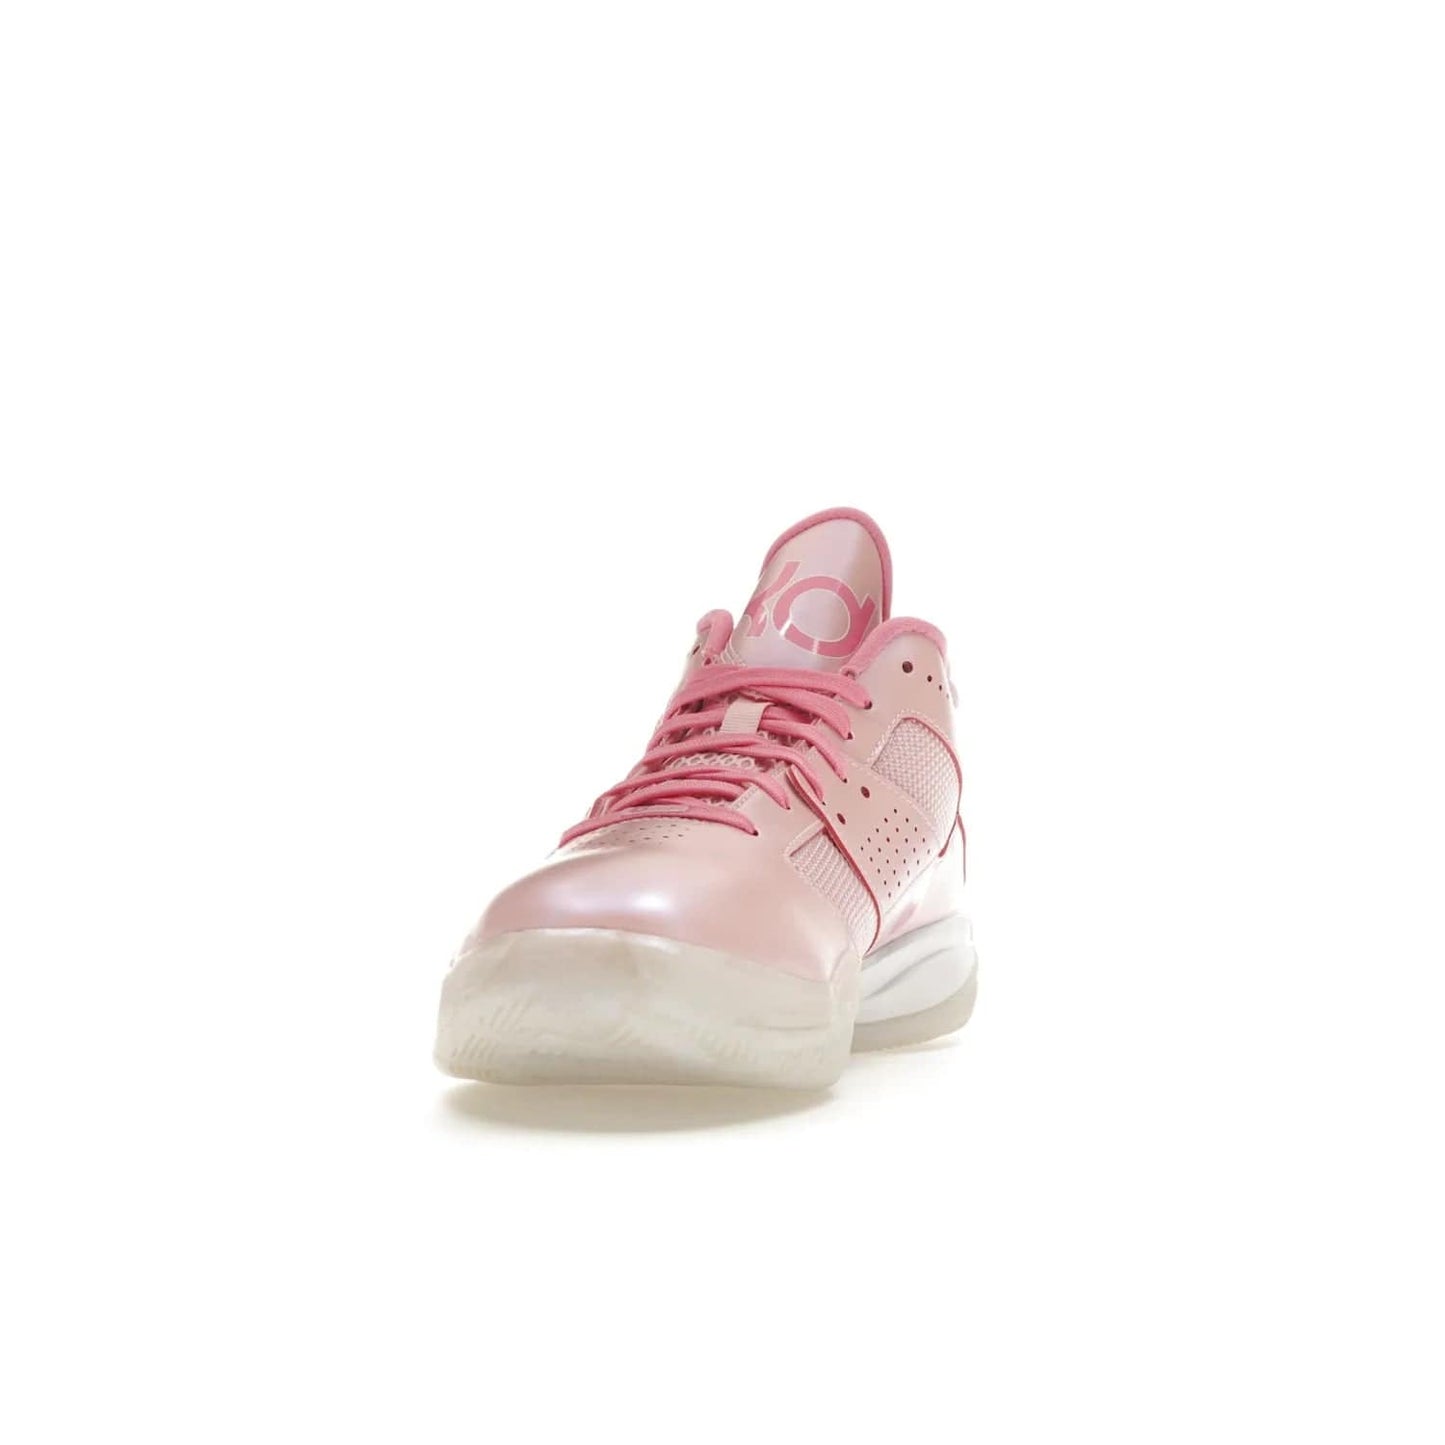 Nike KD 3 Aunt Pearl - Image 12 - Only at www.BallersClubKickz.com - Introducing the Nike KD 3 Aunt Pearl. Featuring a bold Medium Soft Pink, White, & Lotus Pink colorway. Get ready to stand out this October 15th.